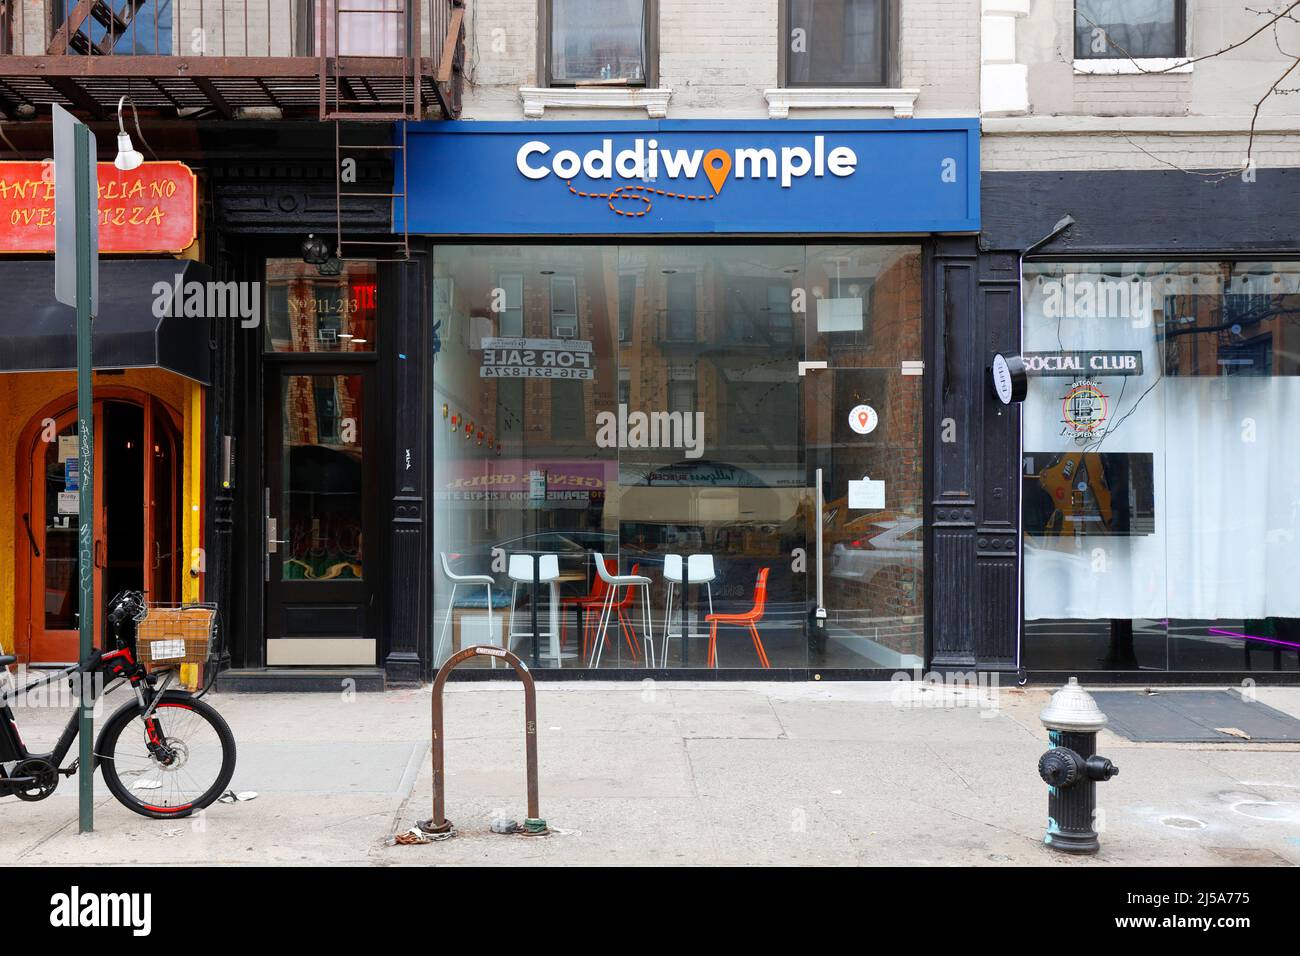 [historical storefront] Coddiwomple, 213 1st Ave, New York, NYC storefront photo of a sandwich shop in the East Village neighborhood. Stock Photo